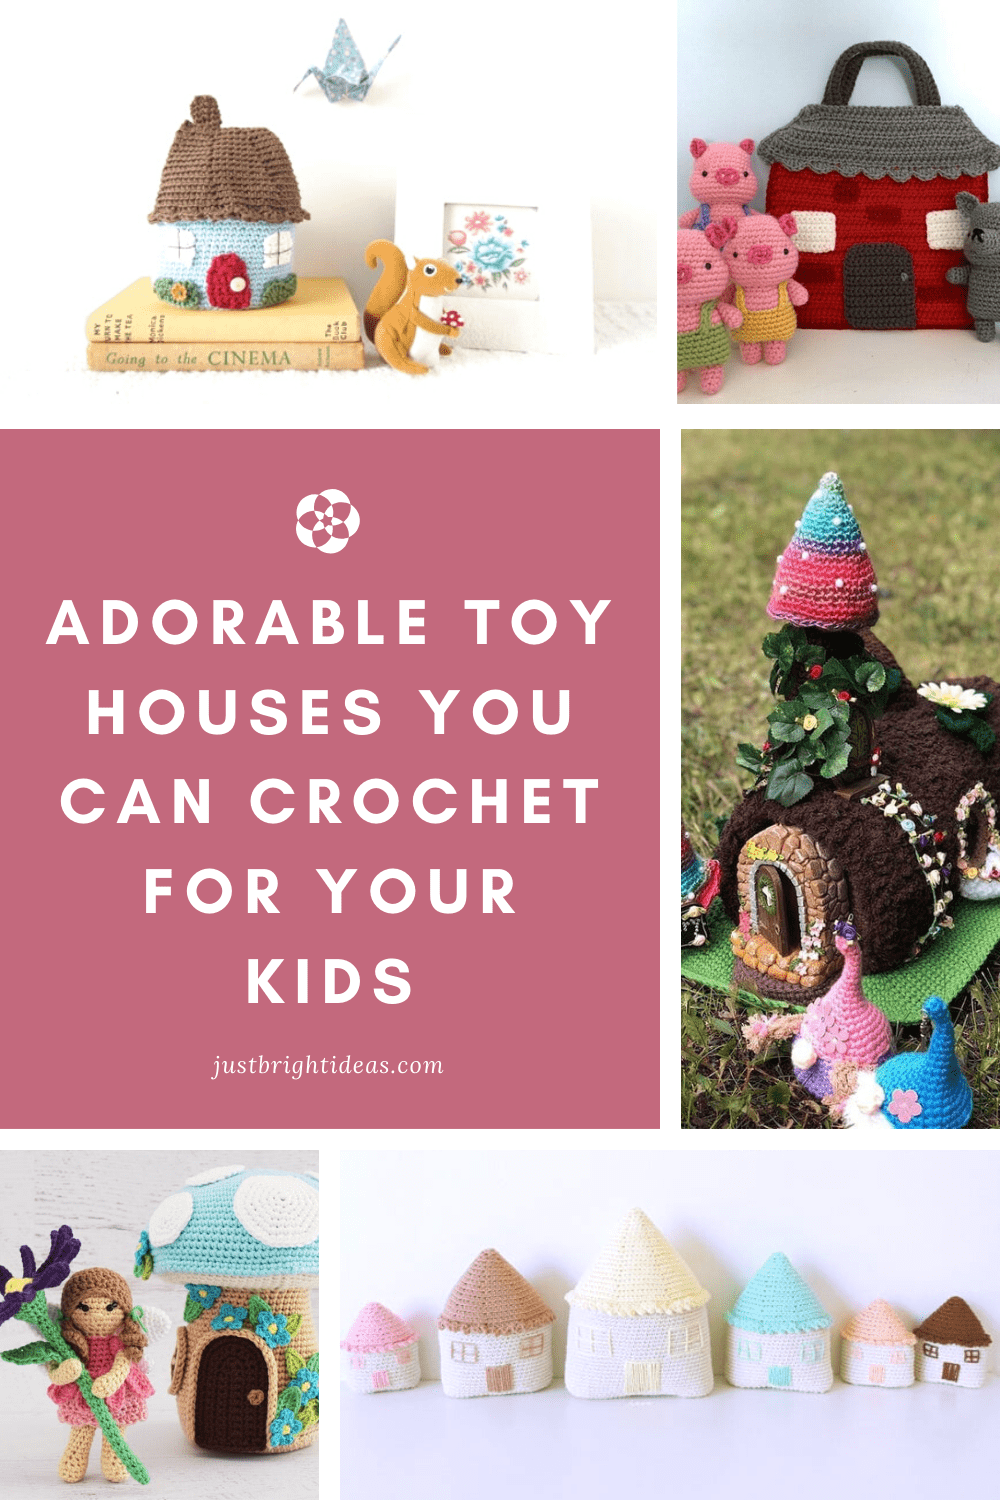 Oh how sweet are these little crochet toy houses! Hours of imaginative play to be had with these!